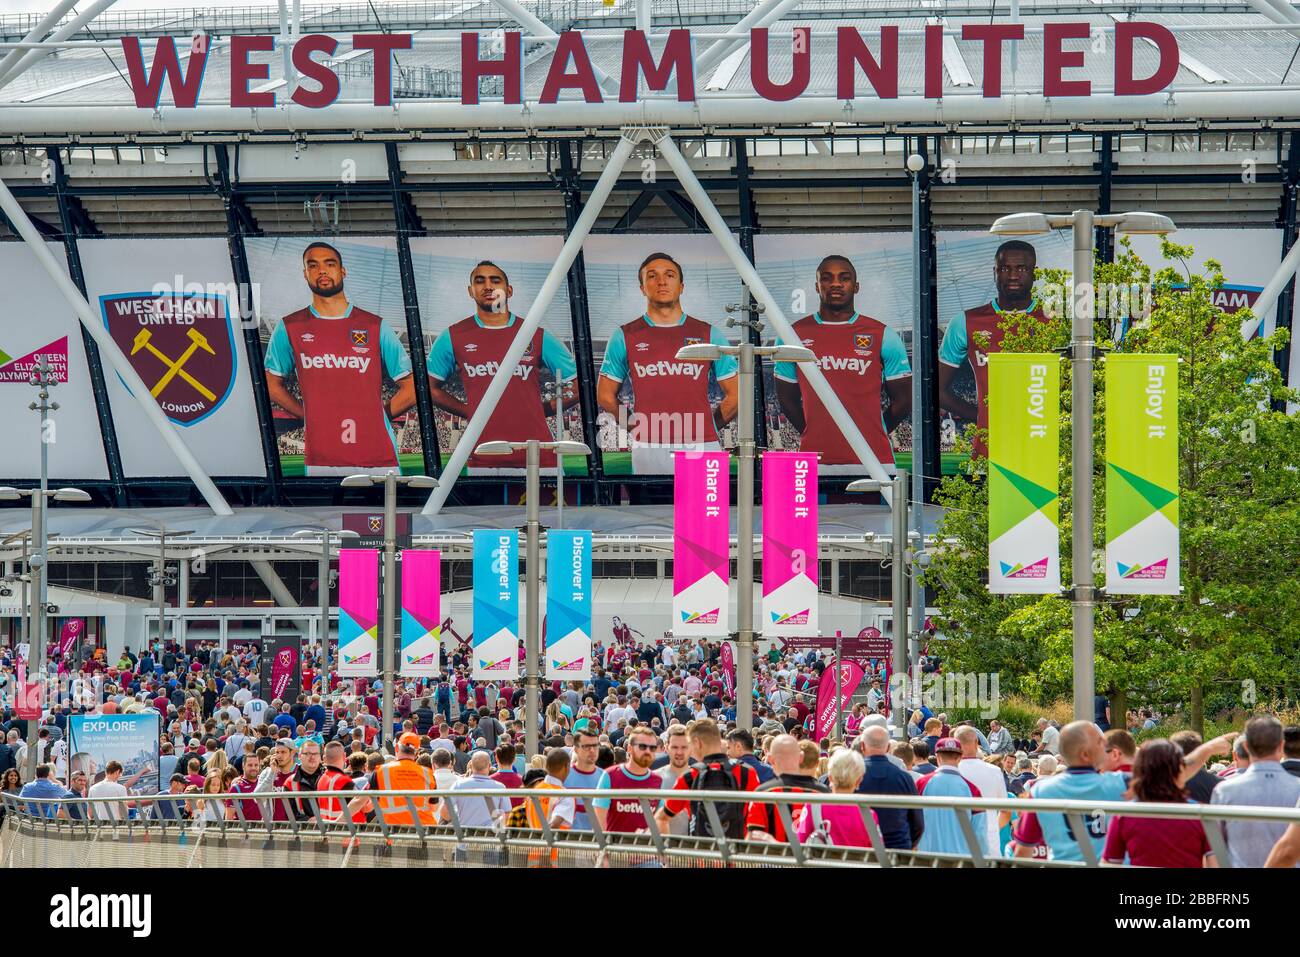 Colourful crowds of football fans head to The London Stadium, home of West Ham United Football Club in the Olympic Park East London. Stock Photo